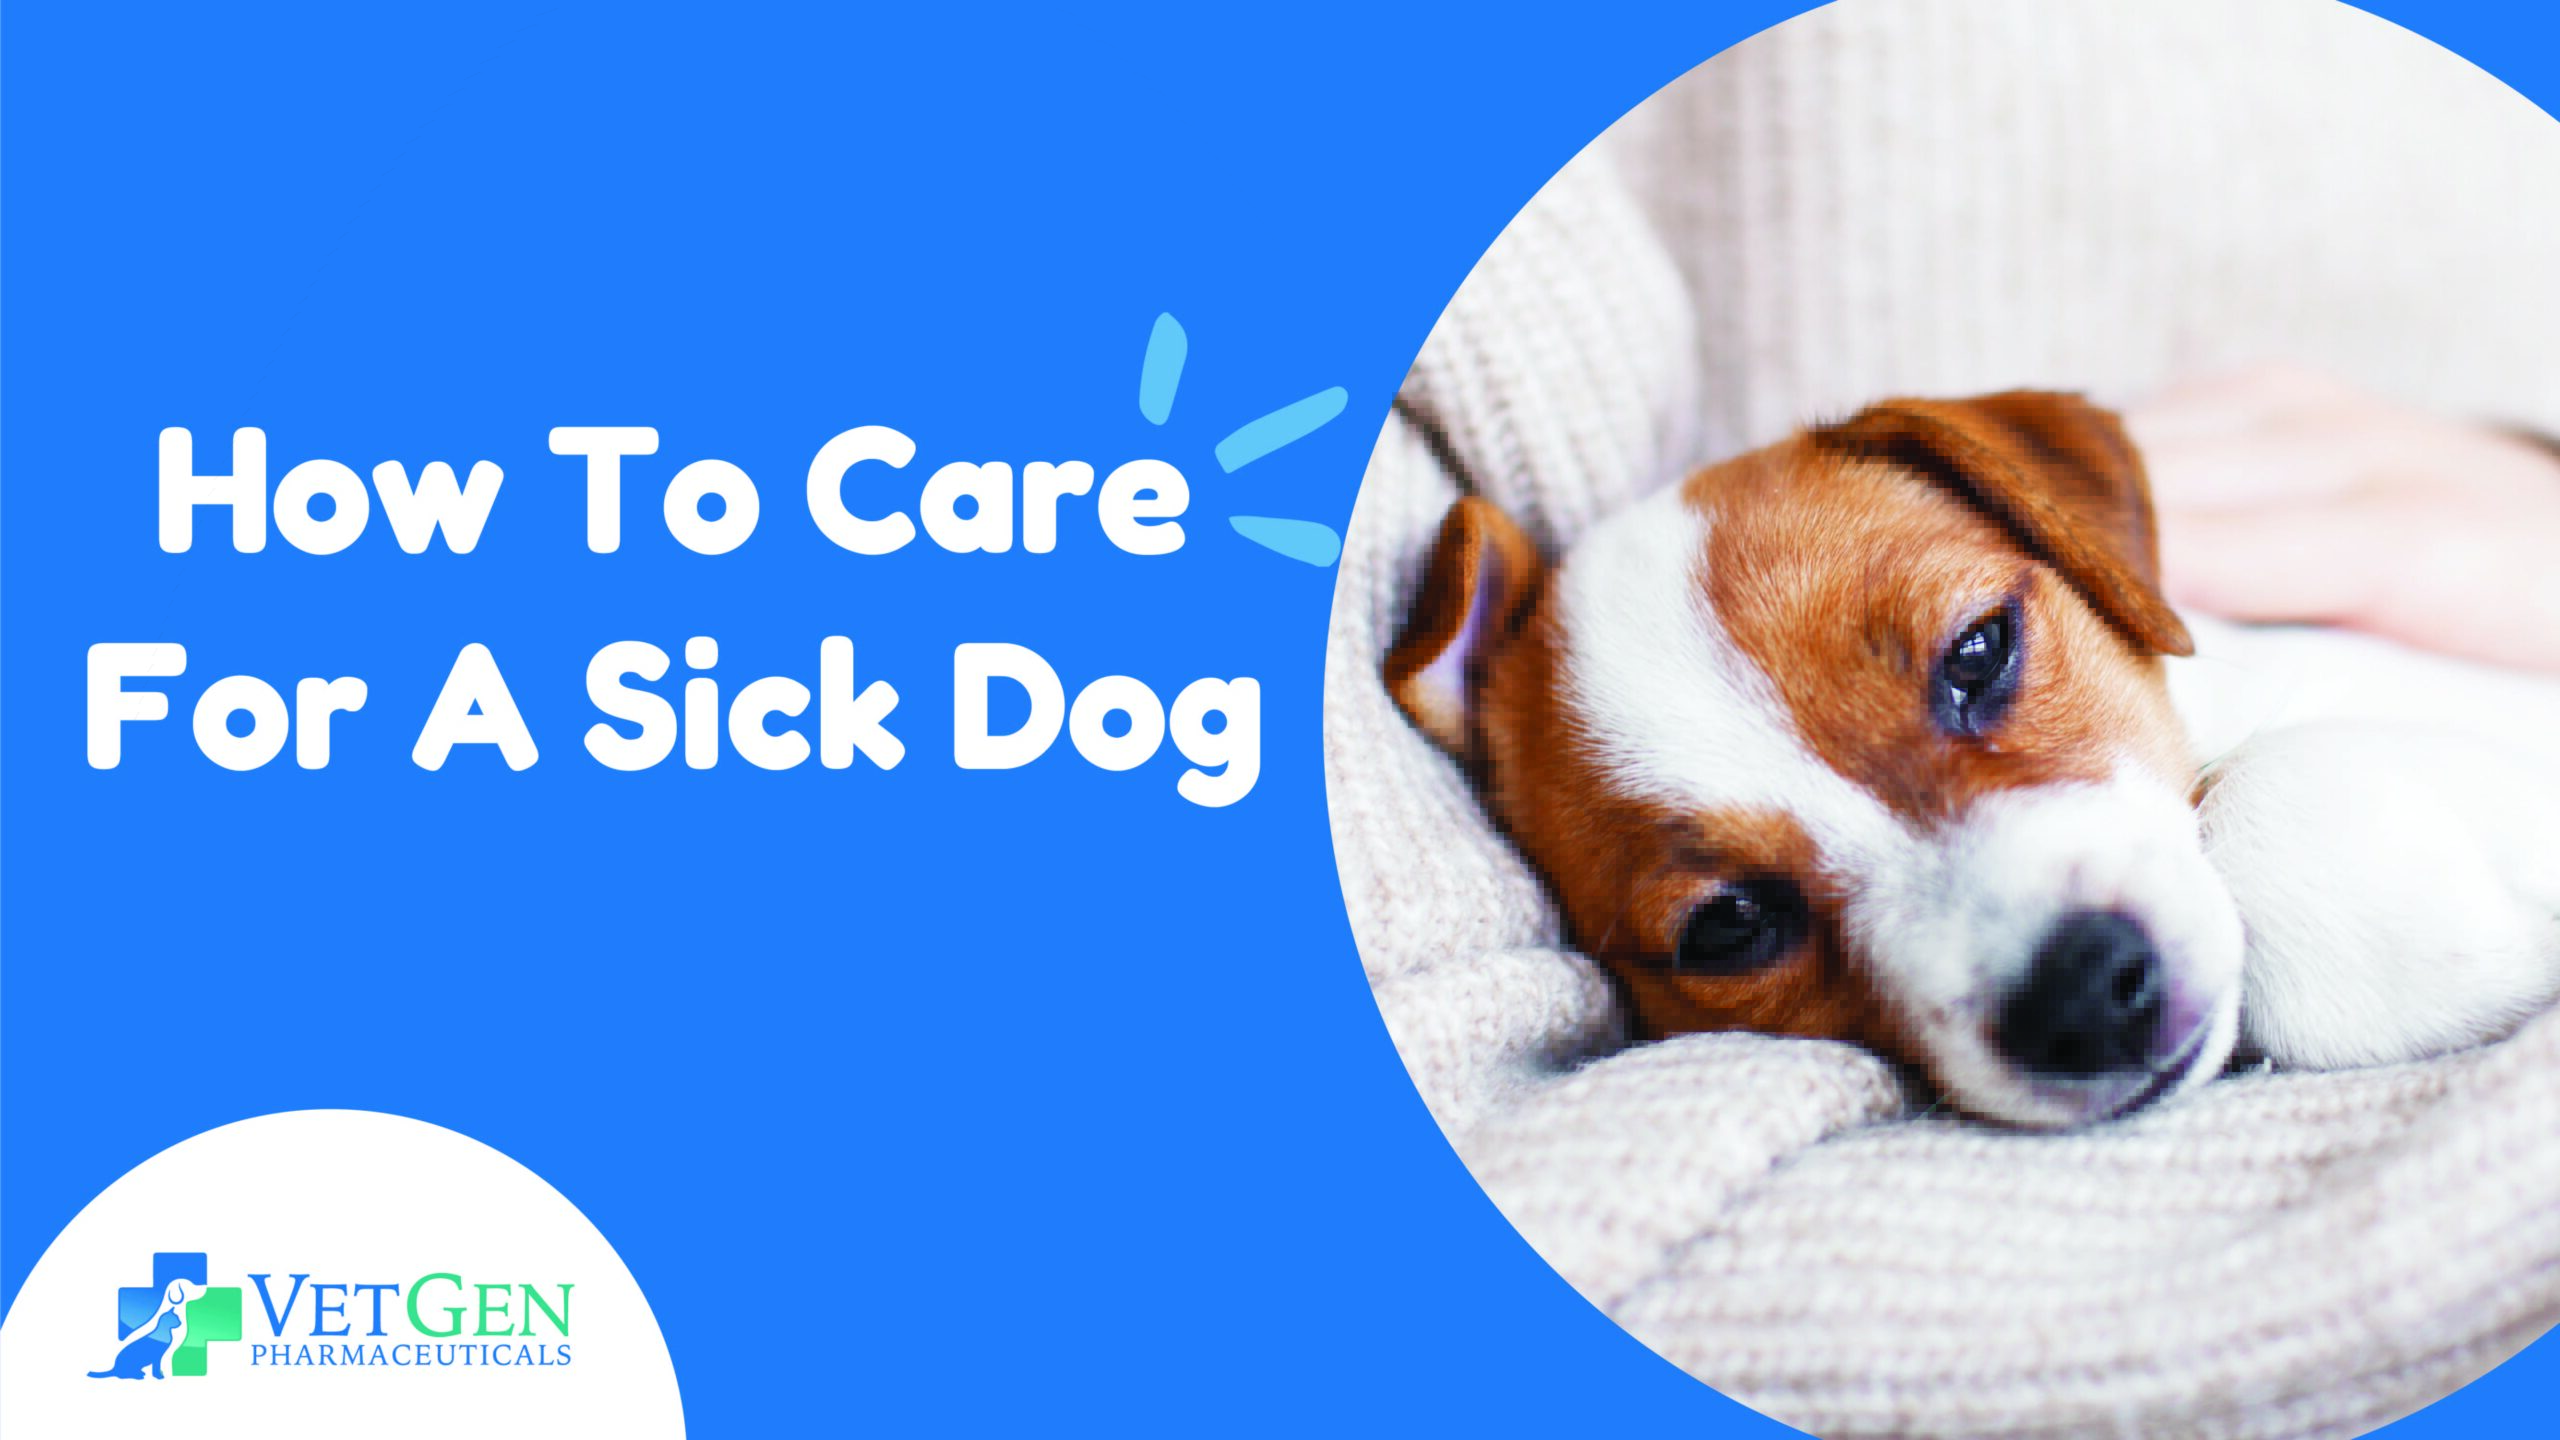 How To Care for A Sick Dog